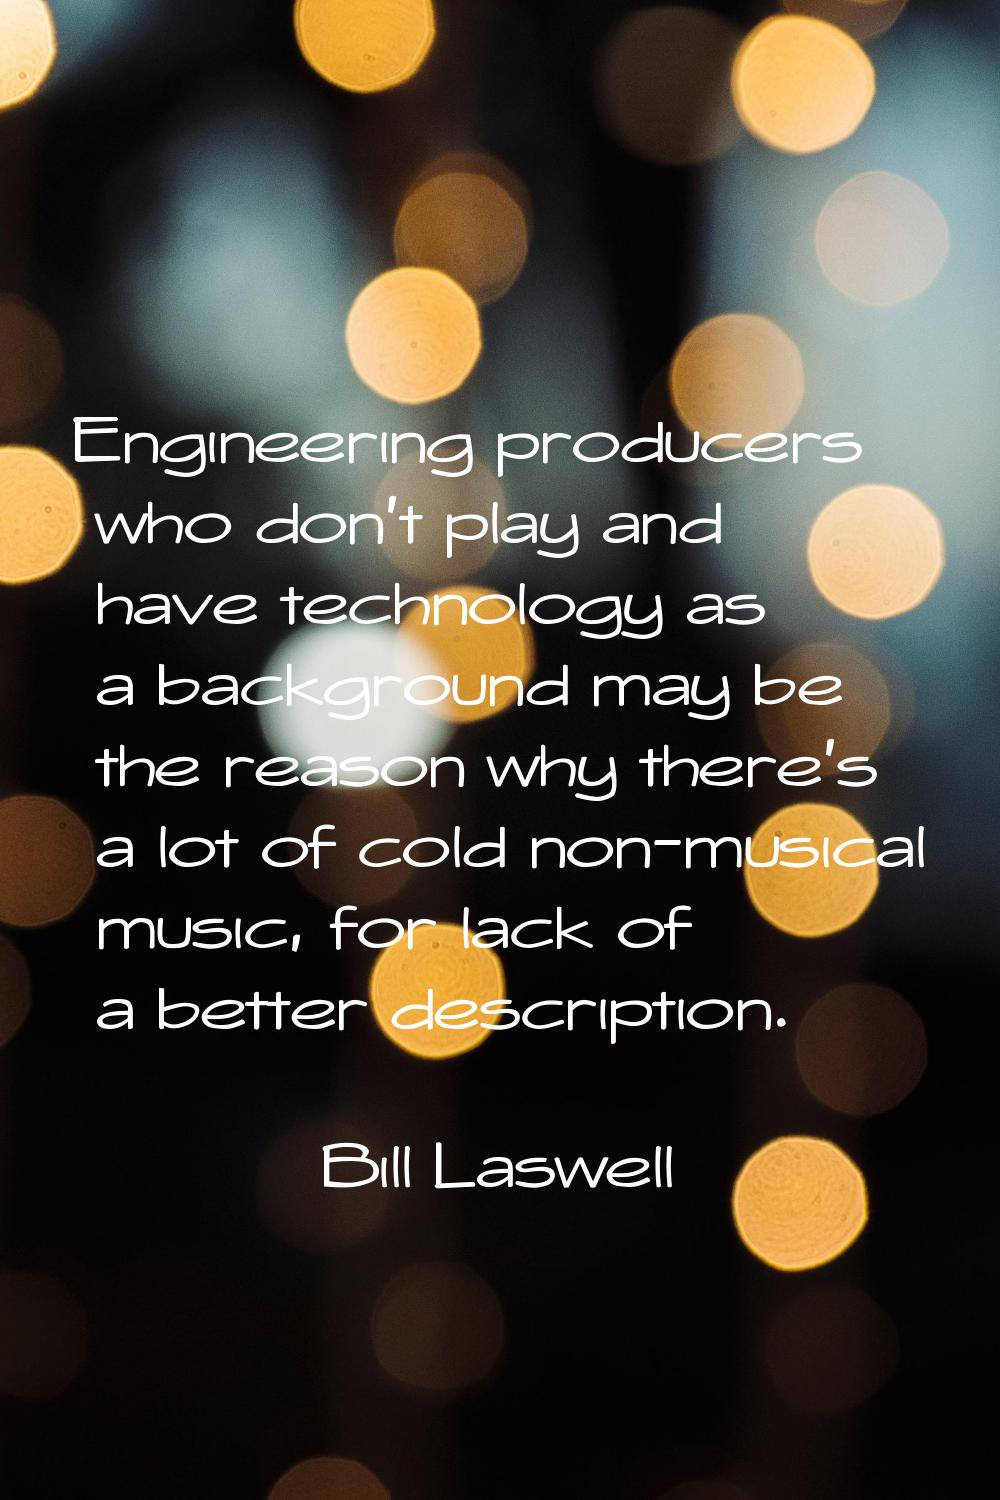 Engineering producers who don't play and have technology as a background may be the reason why ther